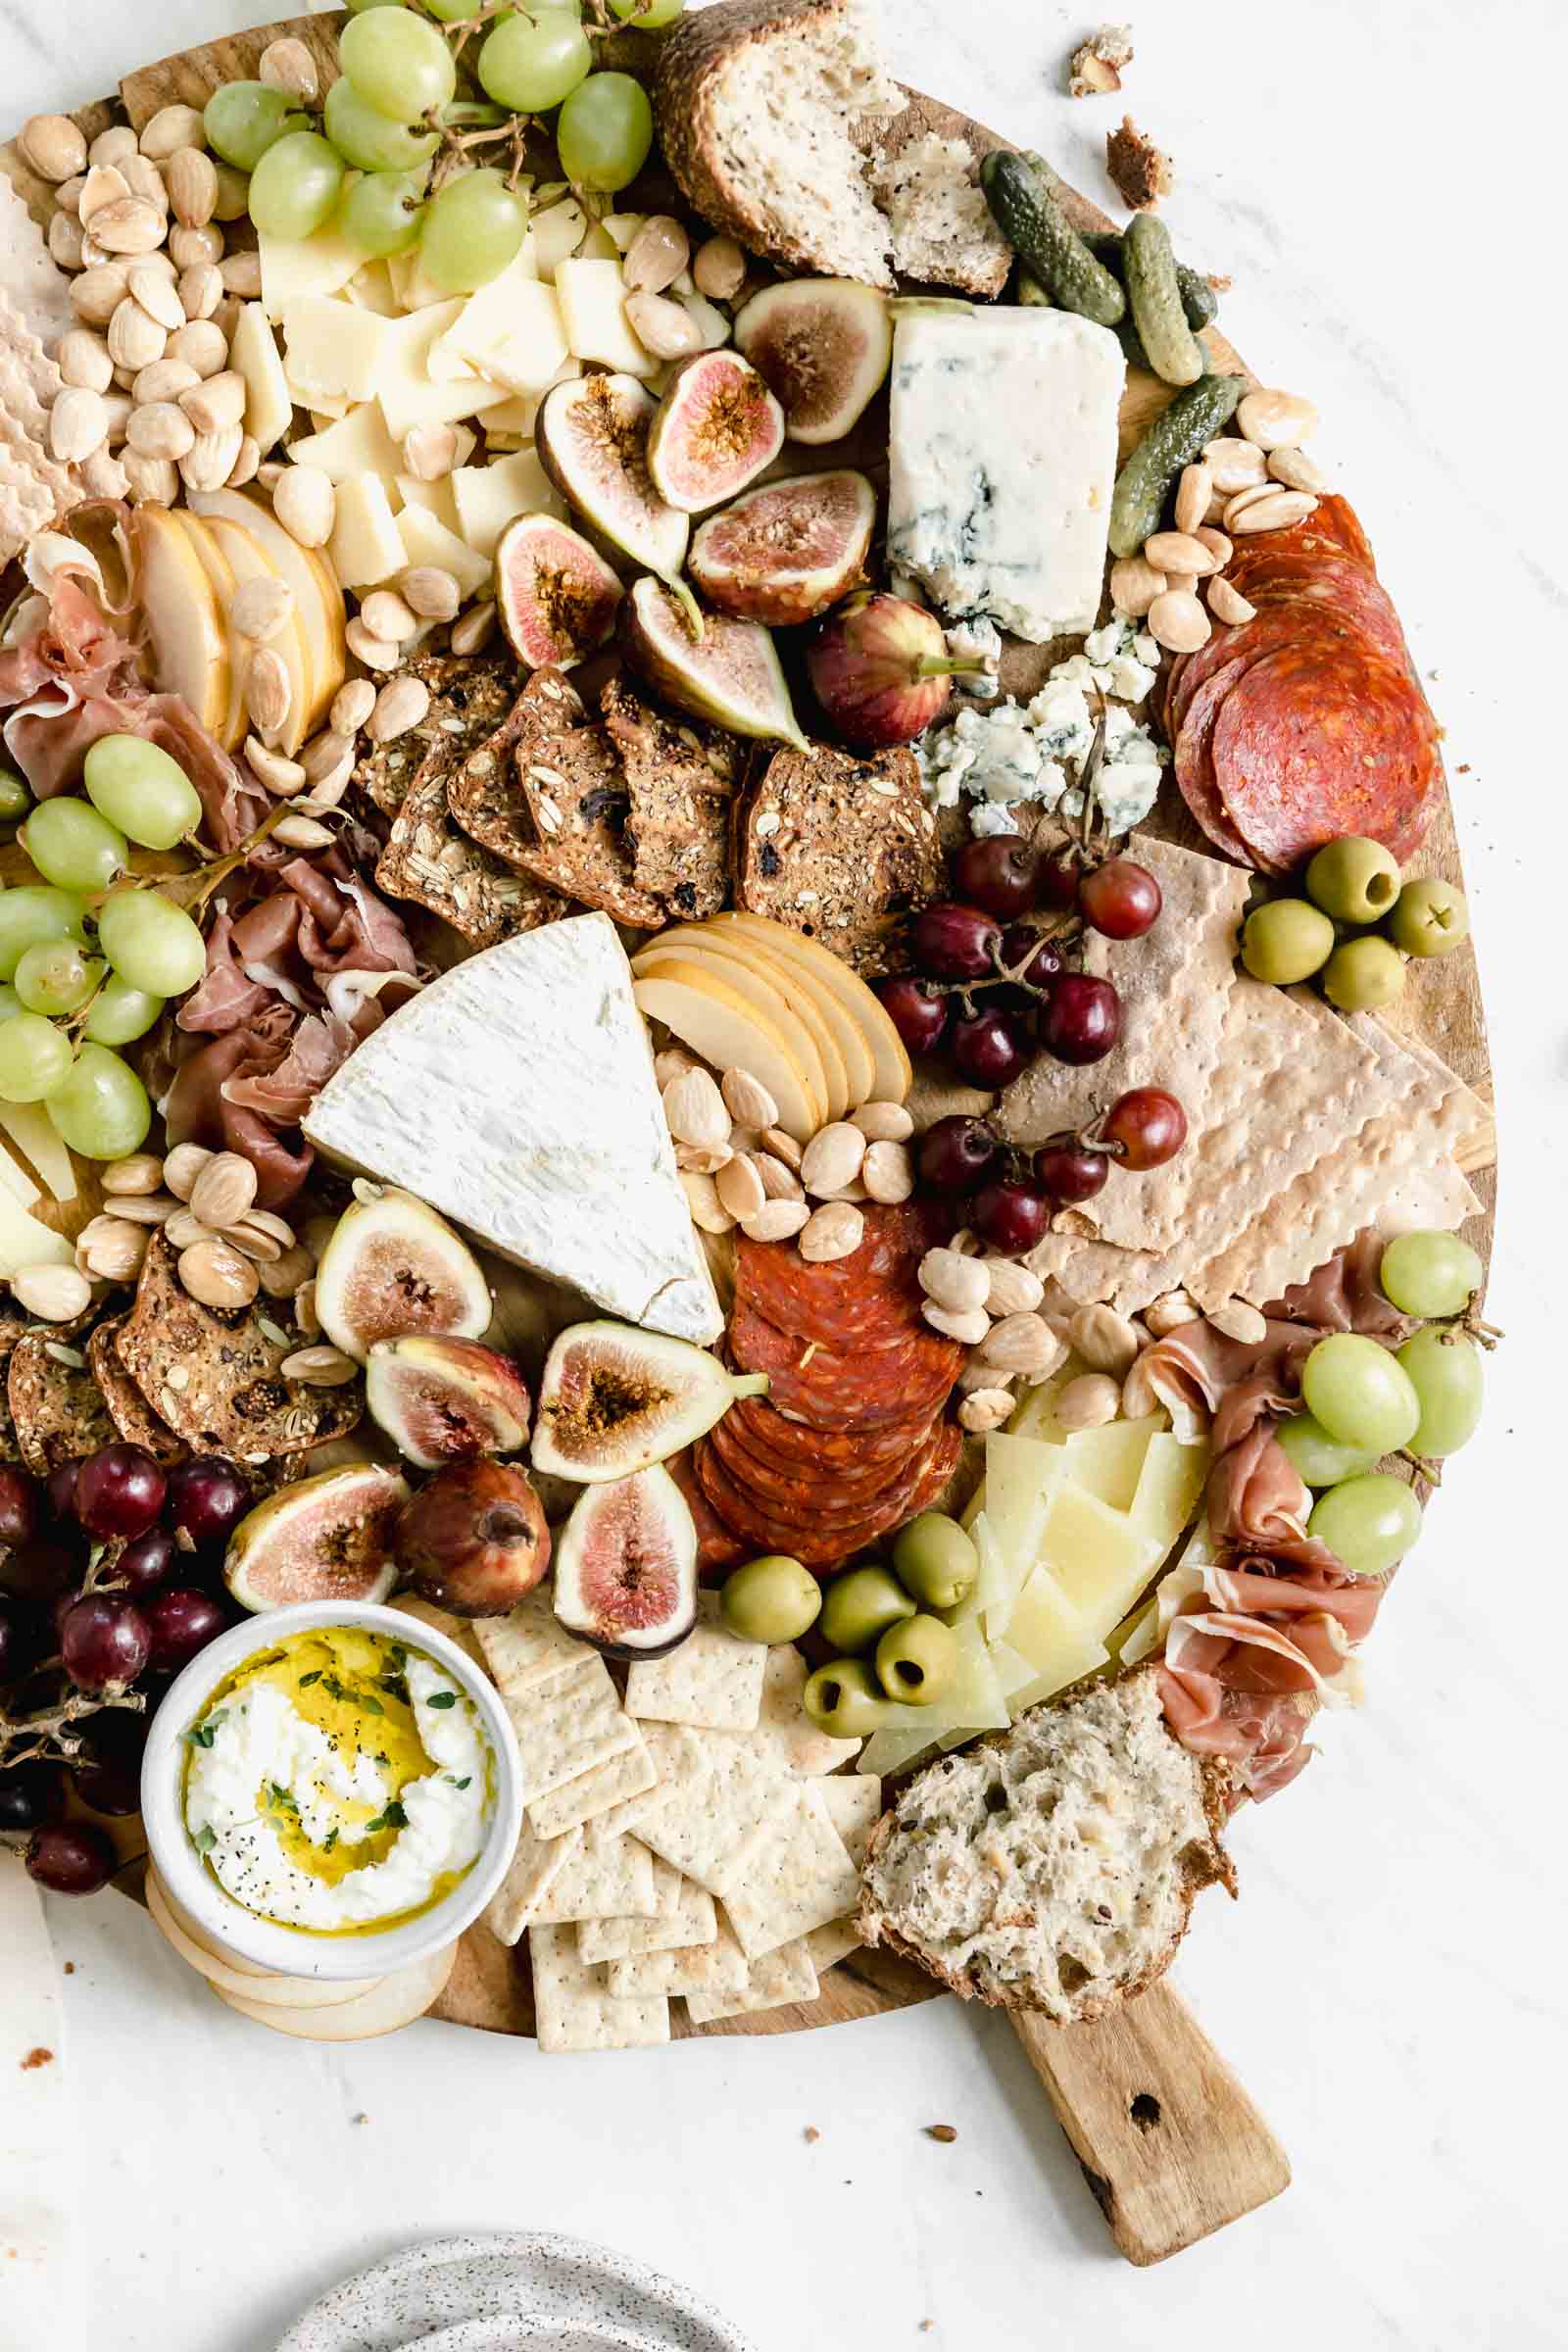 instagrammable cheeseboard loaded with cheese, meats, almonds, olives, and crackers